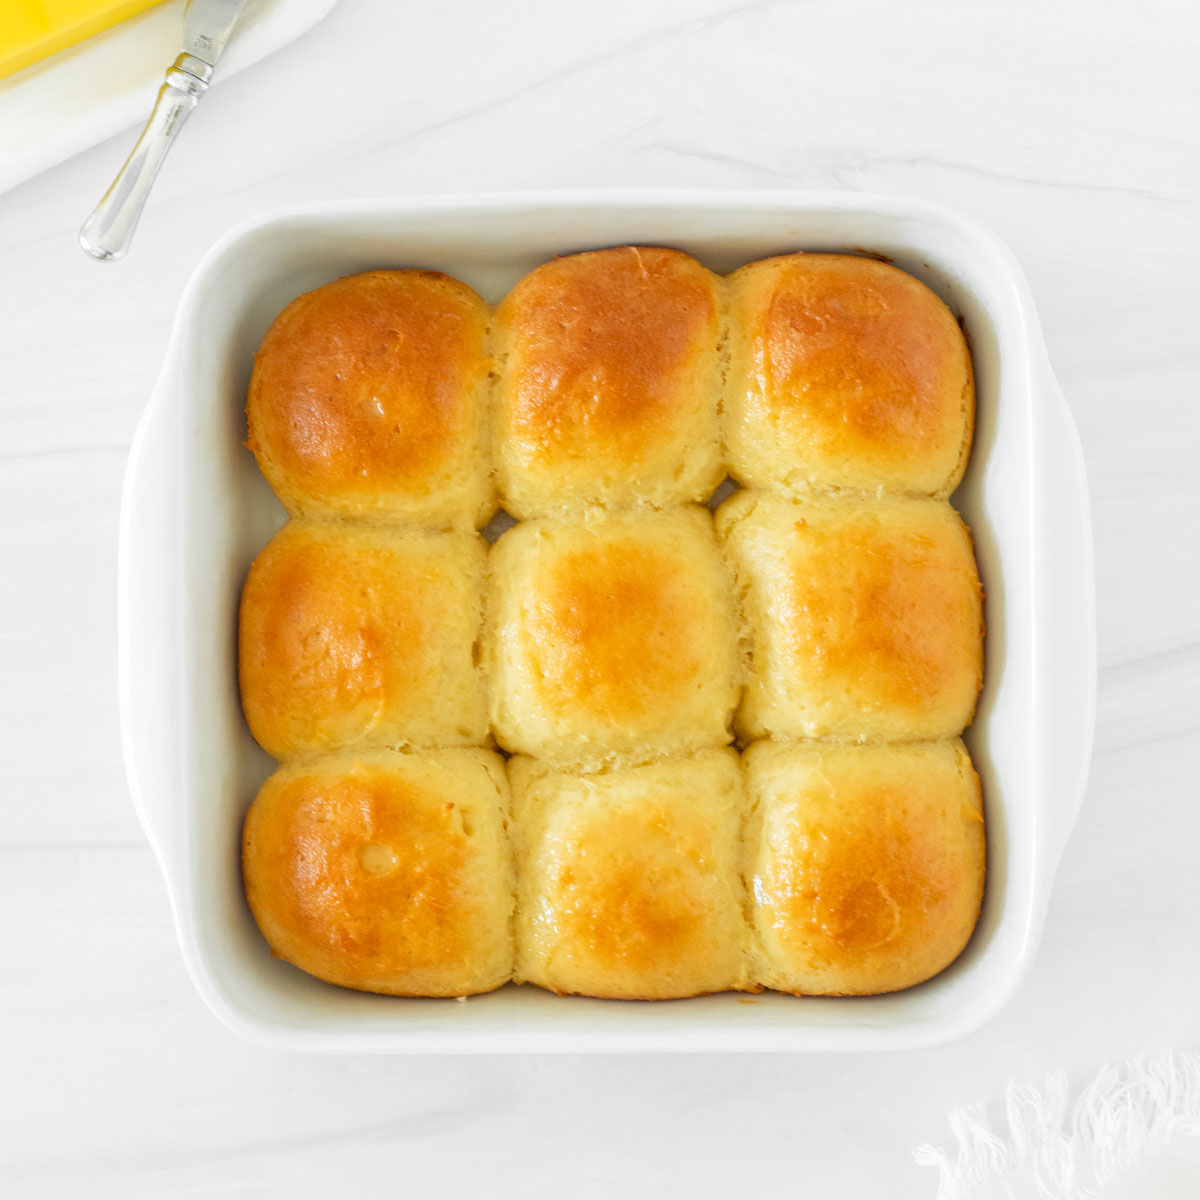 These gluten-free dinner rolls are the perfect soft and buttery rolls made with a blend of gluten-free flours and yeast for delicious homemade rolls.